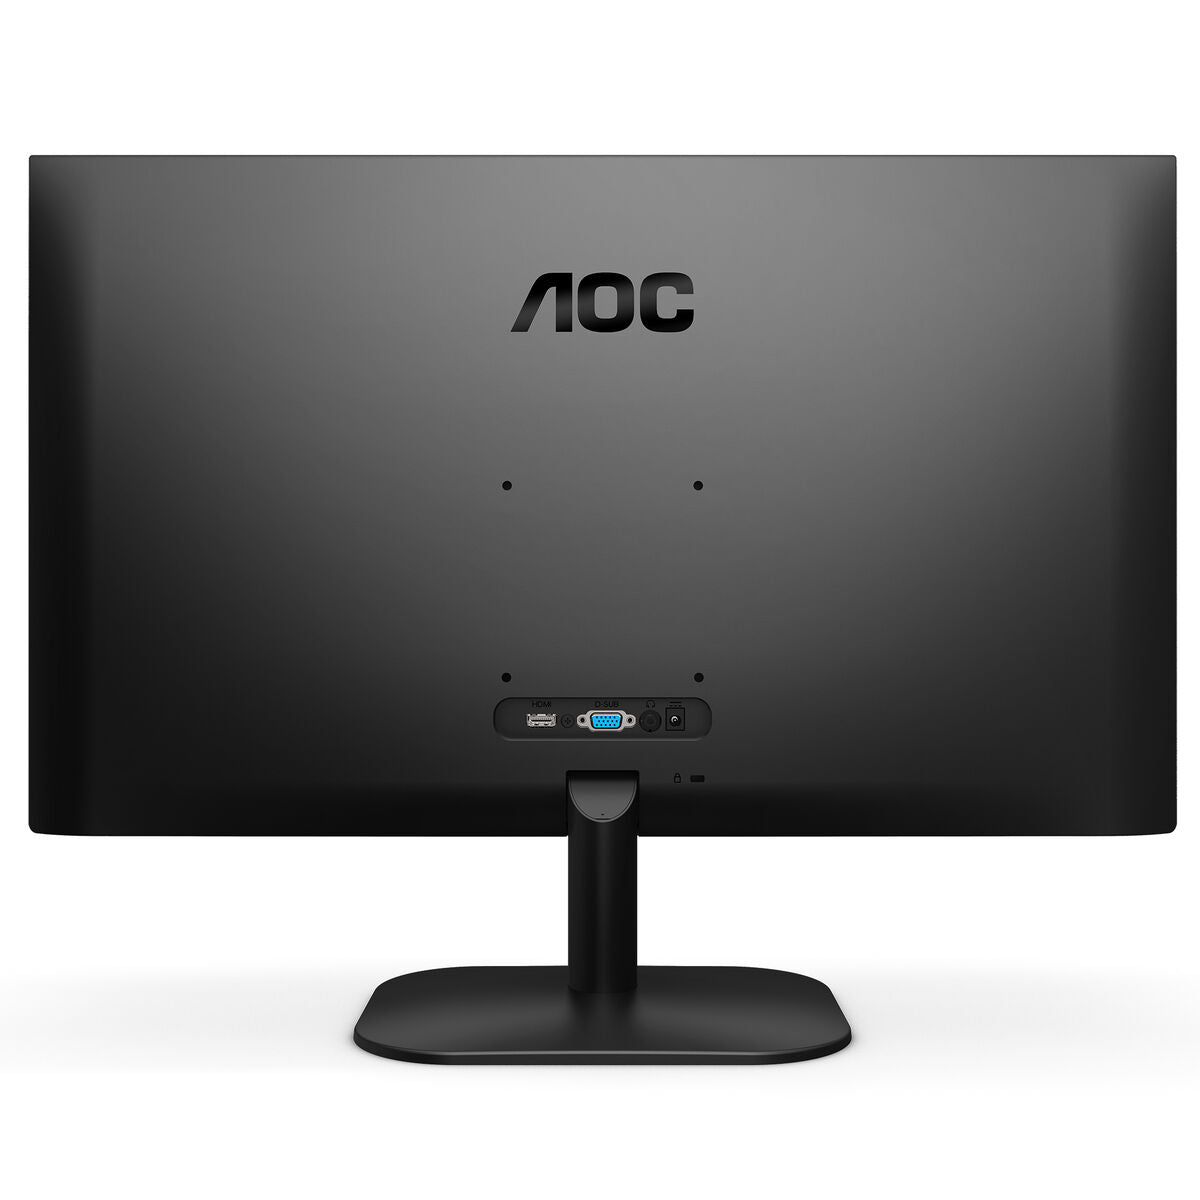 Monitor AOC 24B2XHM2 FHD LED 23,8" LCD VA Flicker free 24", AOC, Computing, monitor-aoc-24b2xhm2-fhd-led-23-8-lcd-va-flicker-free-24, Brand_AOC, category-reference-2609, category-reference-2642, category-reference-2644, category-reference-t-19685, computers / peripherals, Condition_NEW, office, Price_100 - 200, Teleworking, RiotNook